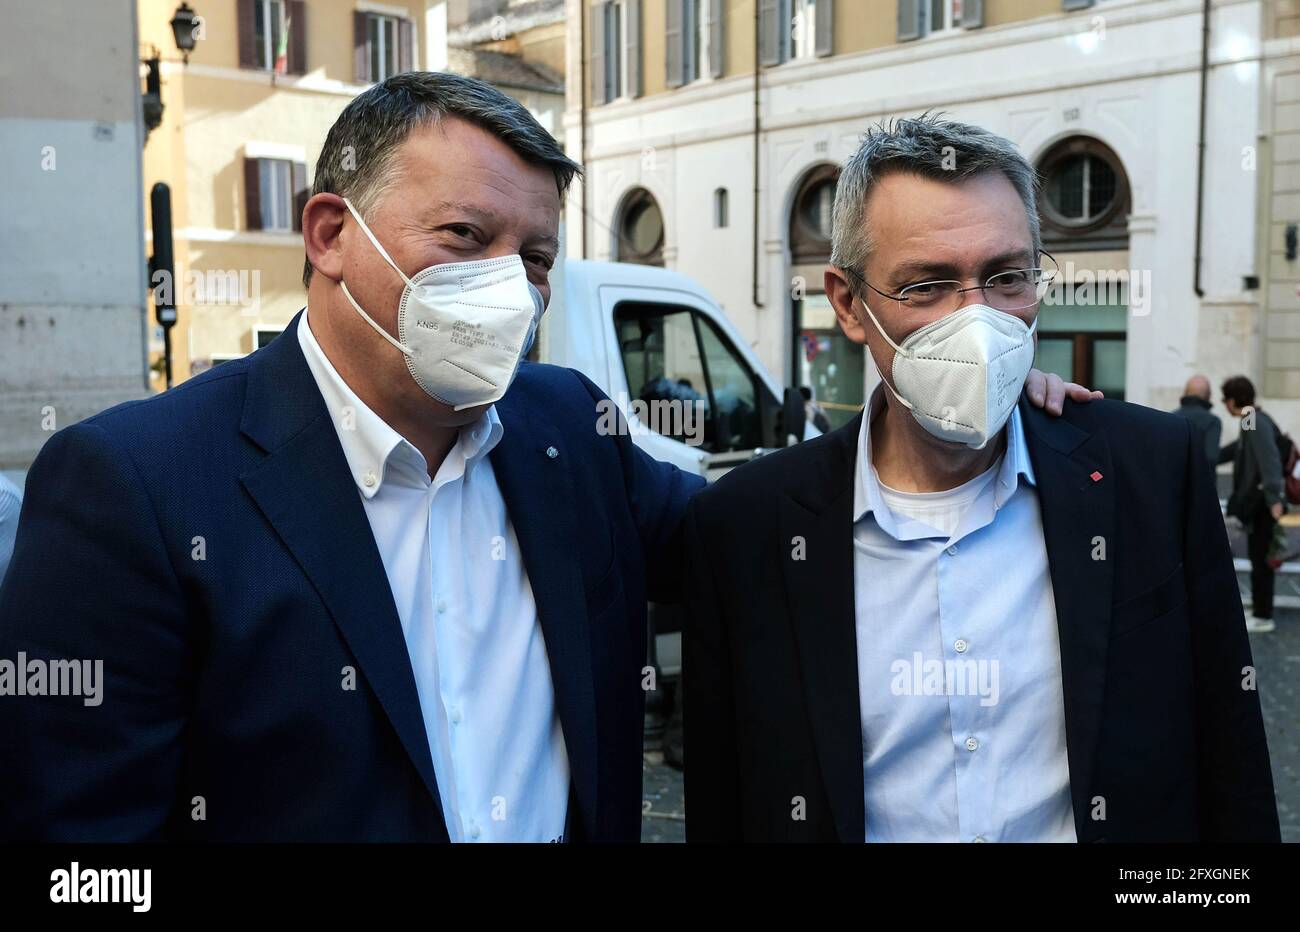 Italy, Rome, may 26, 2021 : Cgil Cisl Uil trade union demonstration against deaths at work, in front of italian Parliament. Pictured (R) Maurizio Landini secretary of the CGIL trade union and (L) Pierpaolo Bombardieri secretary of the UIL trade union.   Photo © Fabio Cimaglia/Sintesi/Alamy Live News Stock Photo